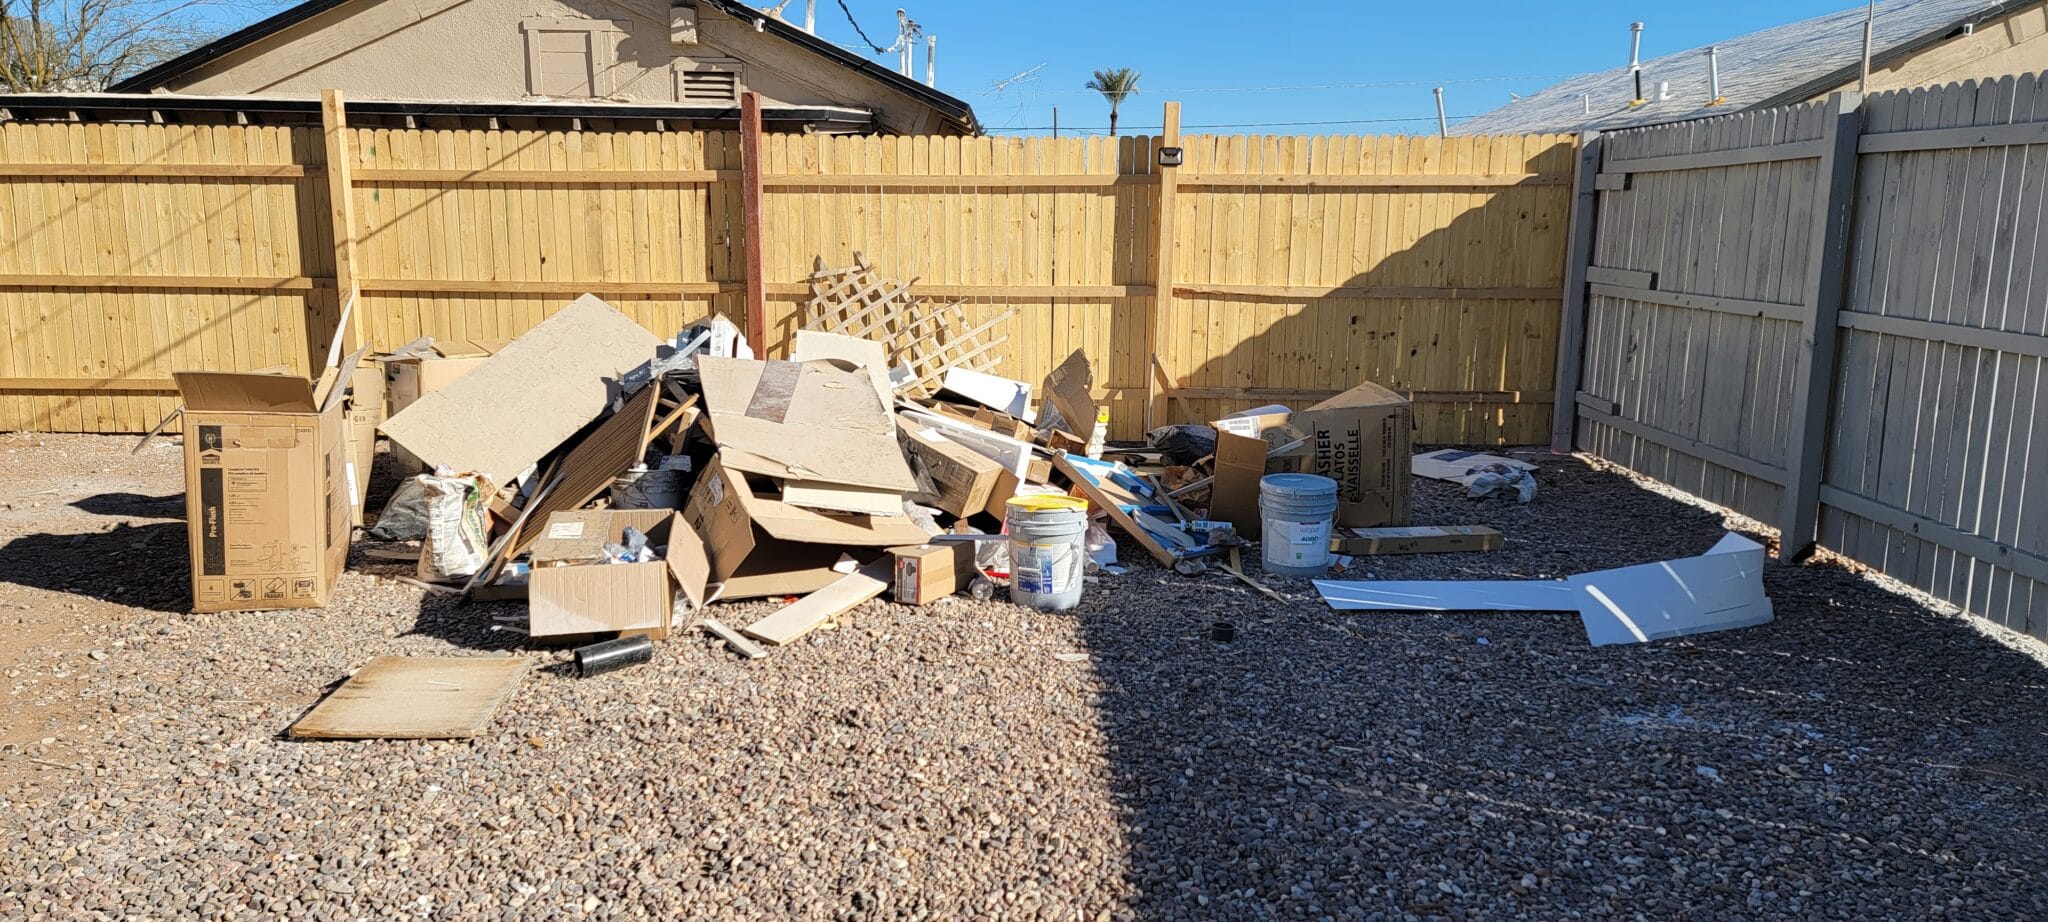 C&W Junk Removal - Pinal County Junk Removal Services